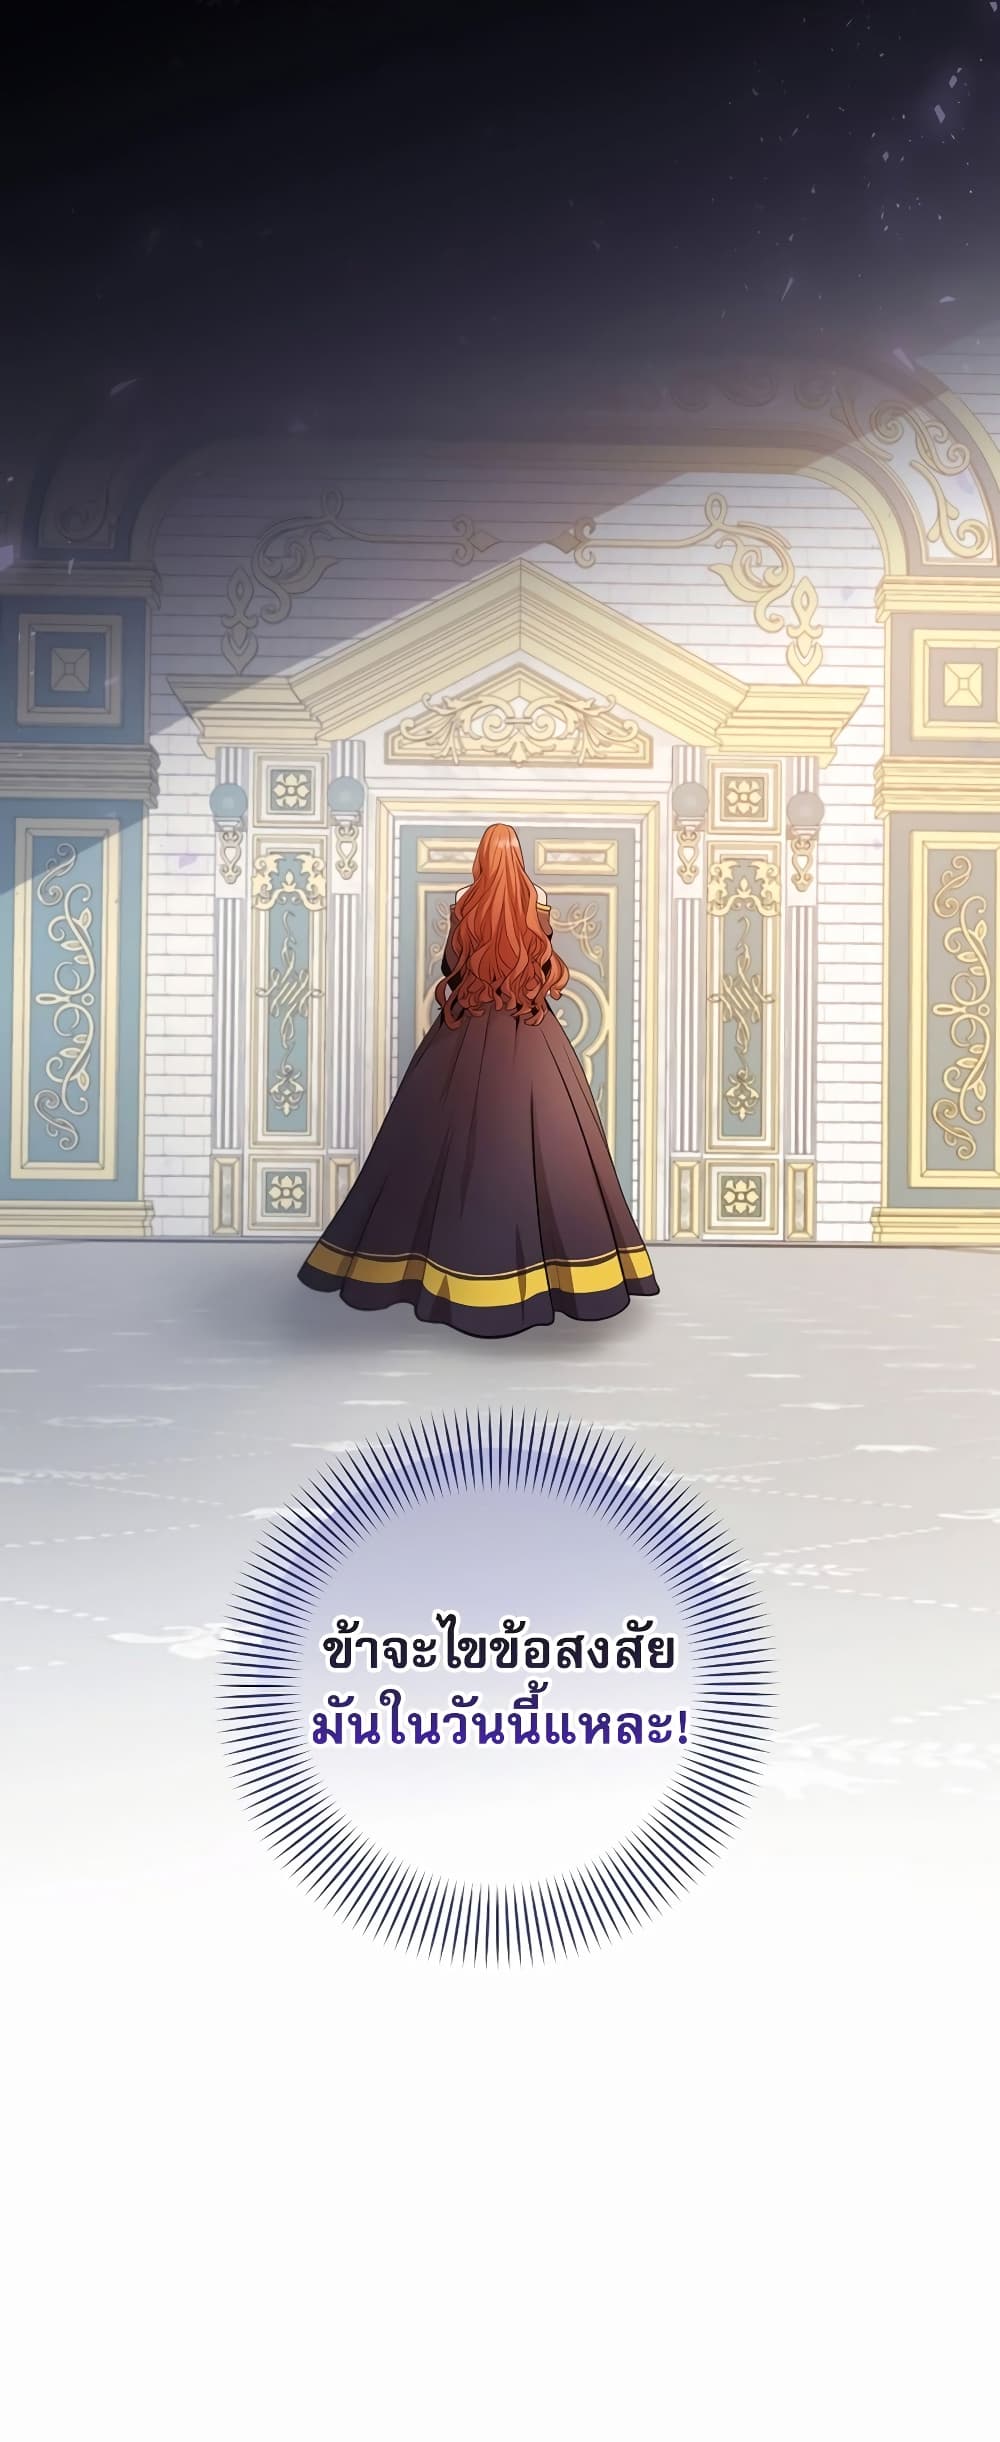 I Became the Youngest Prince in the Novel 3-3